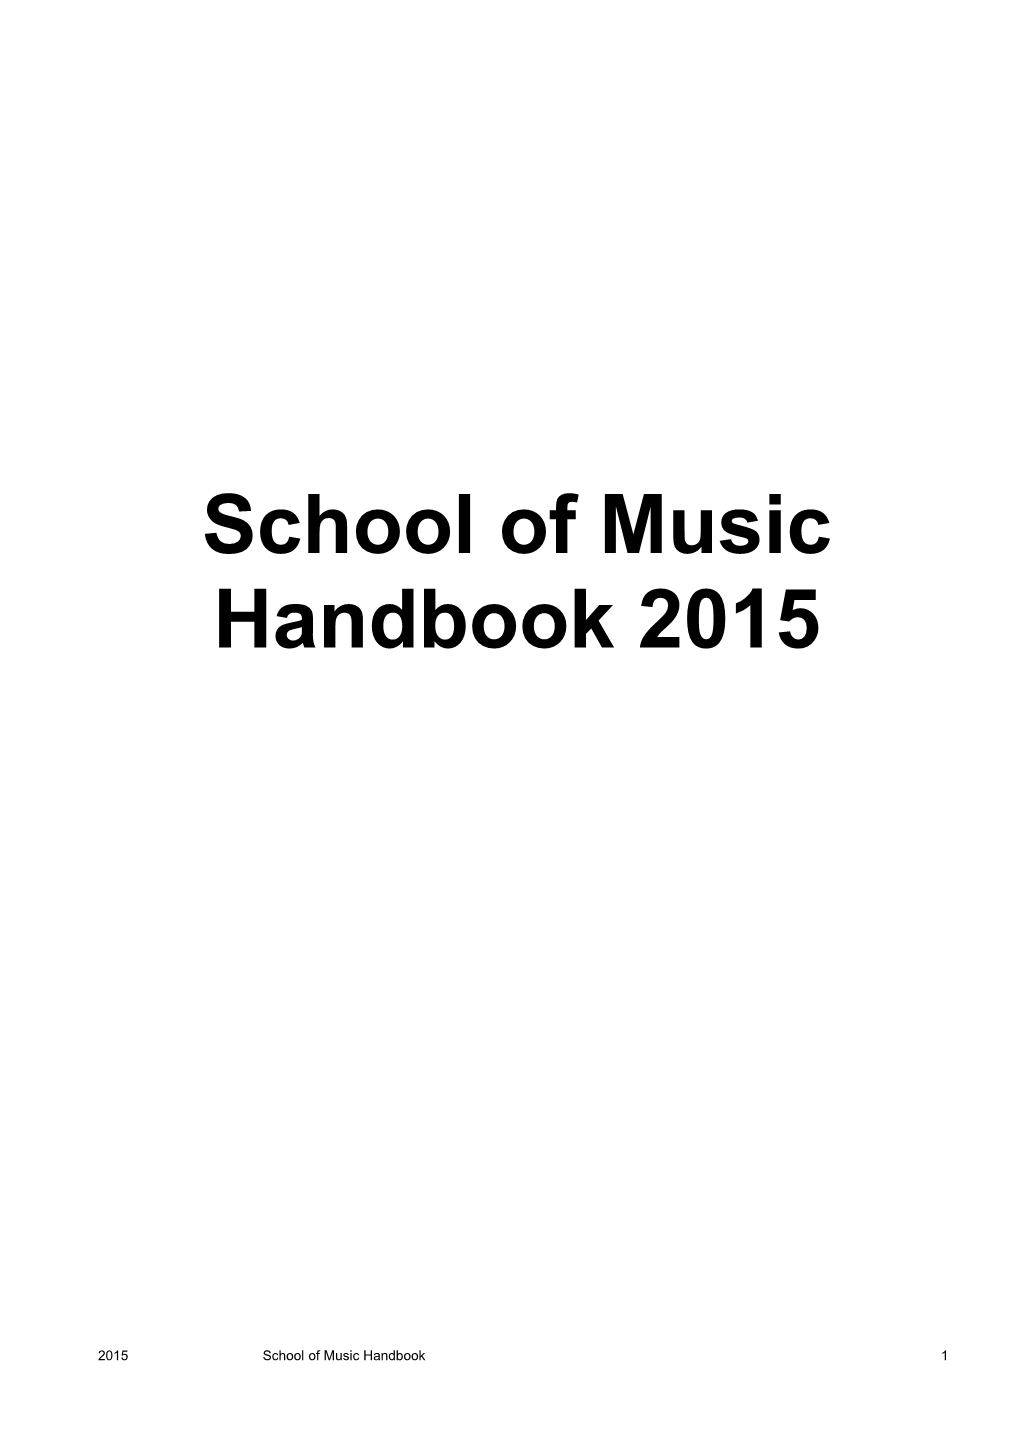 Mission Statement for the School of Music